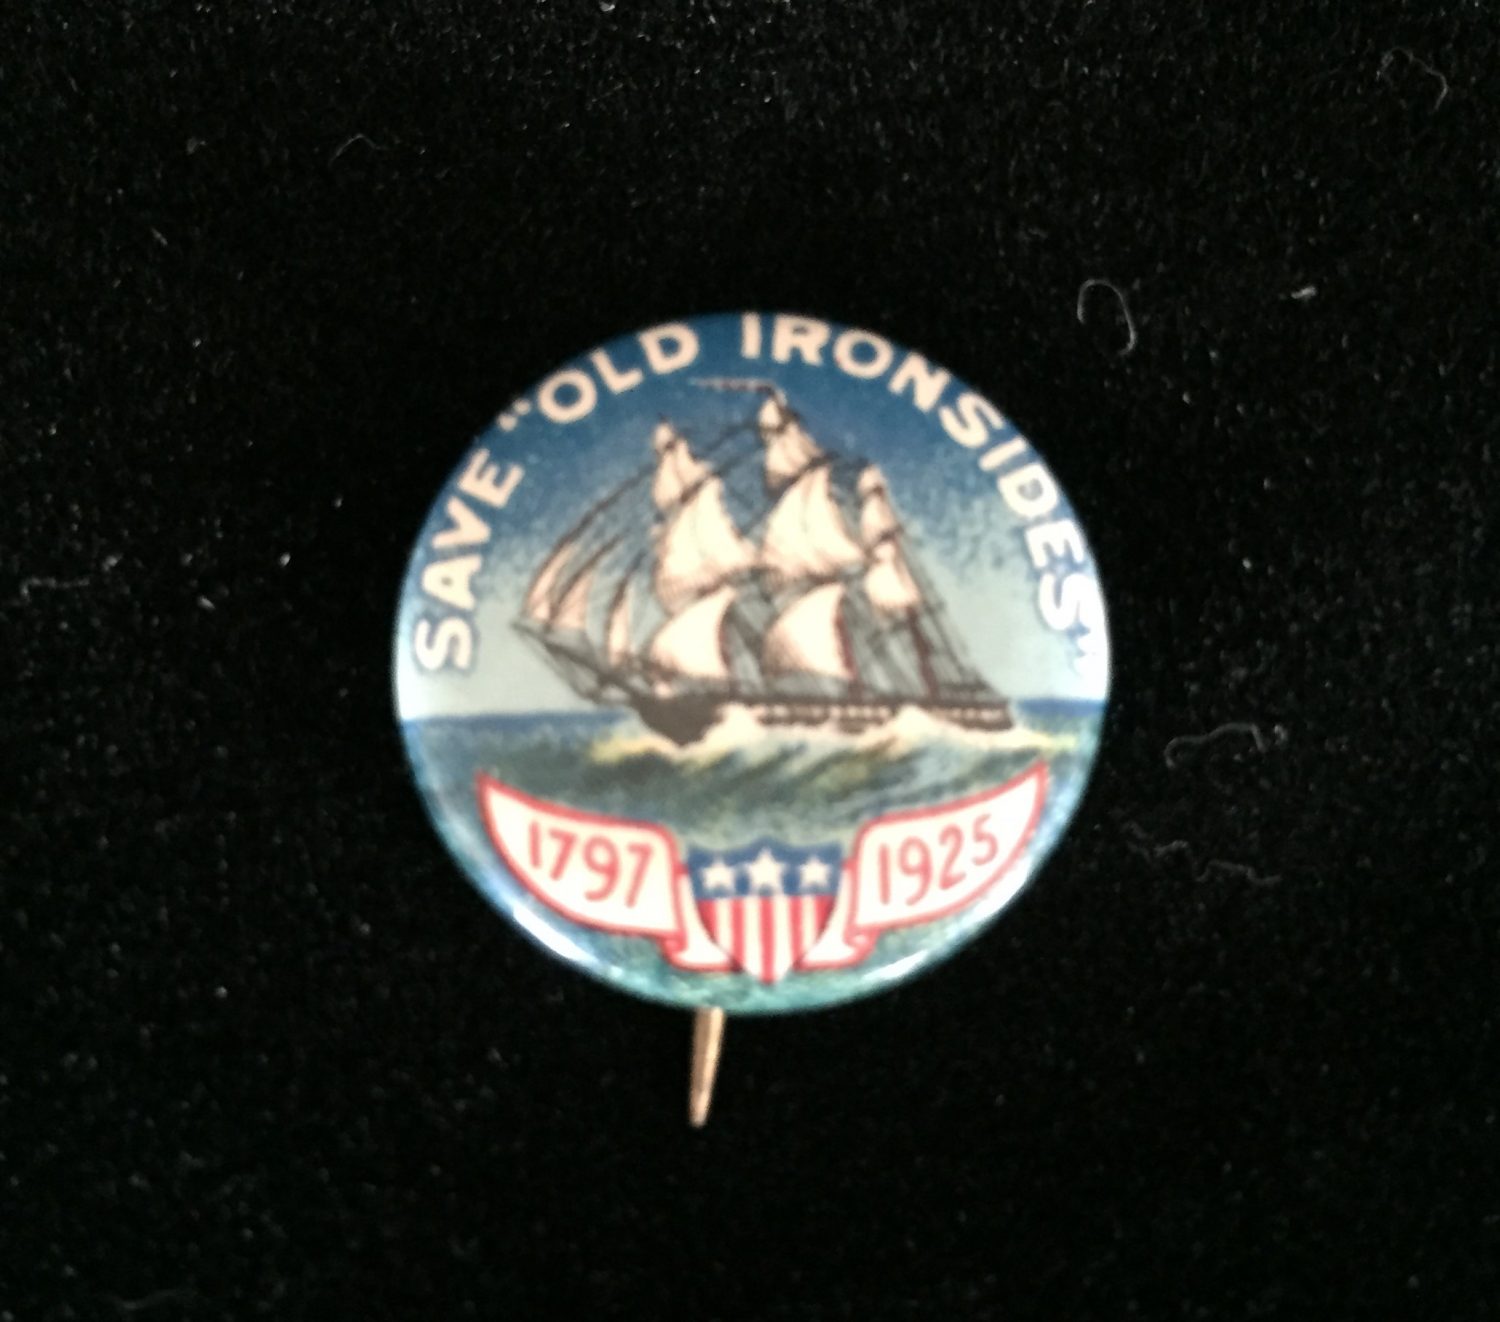 Button from the 1925 drive to raise funds to restore the USS Constitution (Photo: Sarah Sundin)